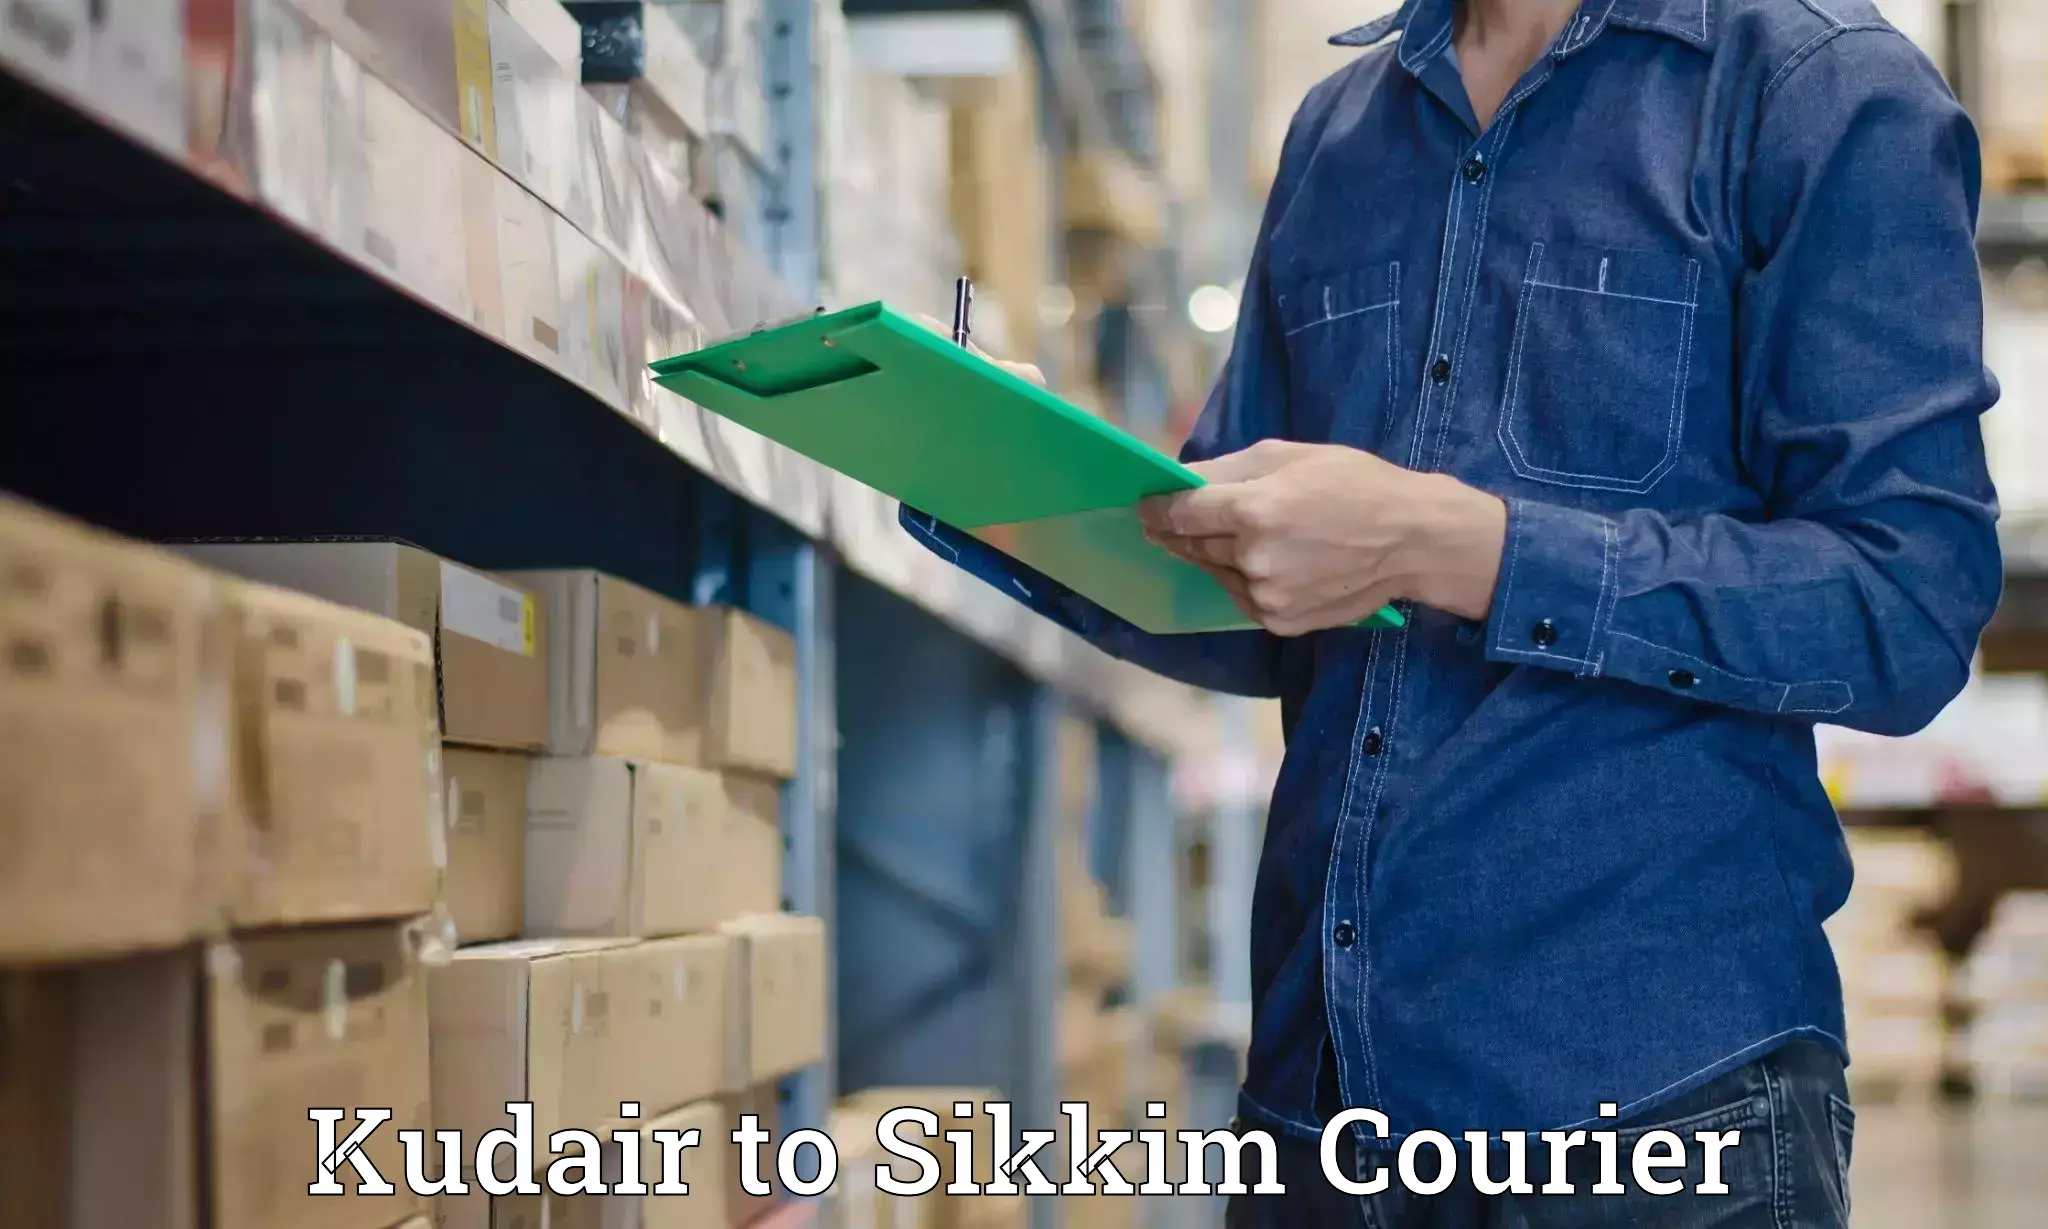 Seamless shipping experience Kudair to Pelling